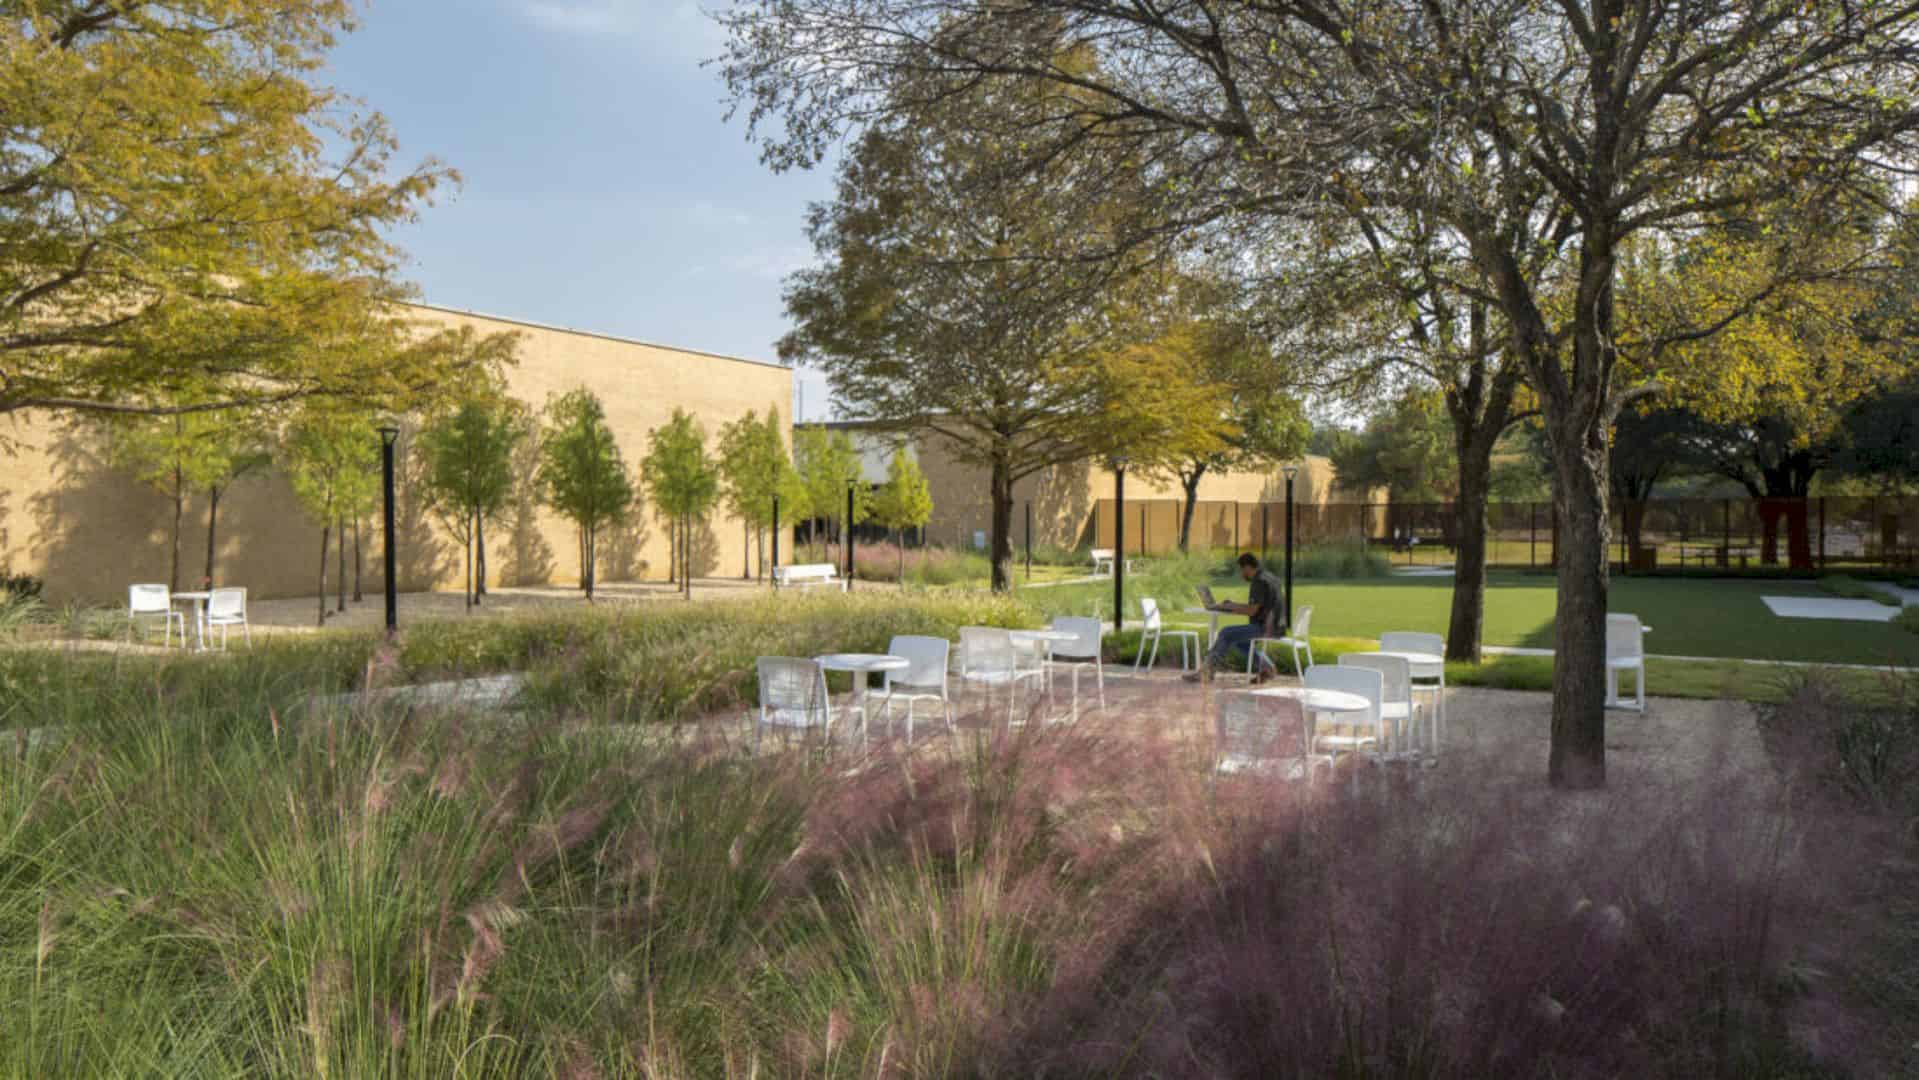 Texas Instruments South Campus Energized And Usable Spaces For Employees Well Being 5